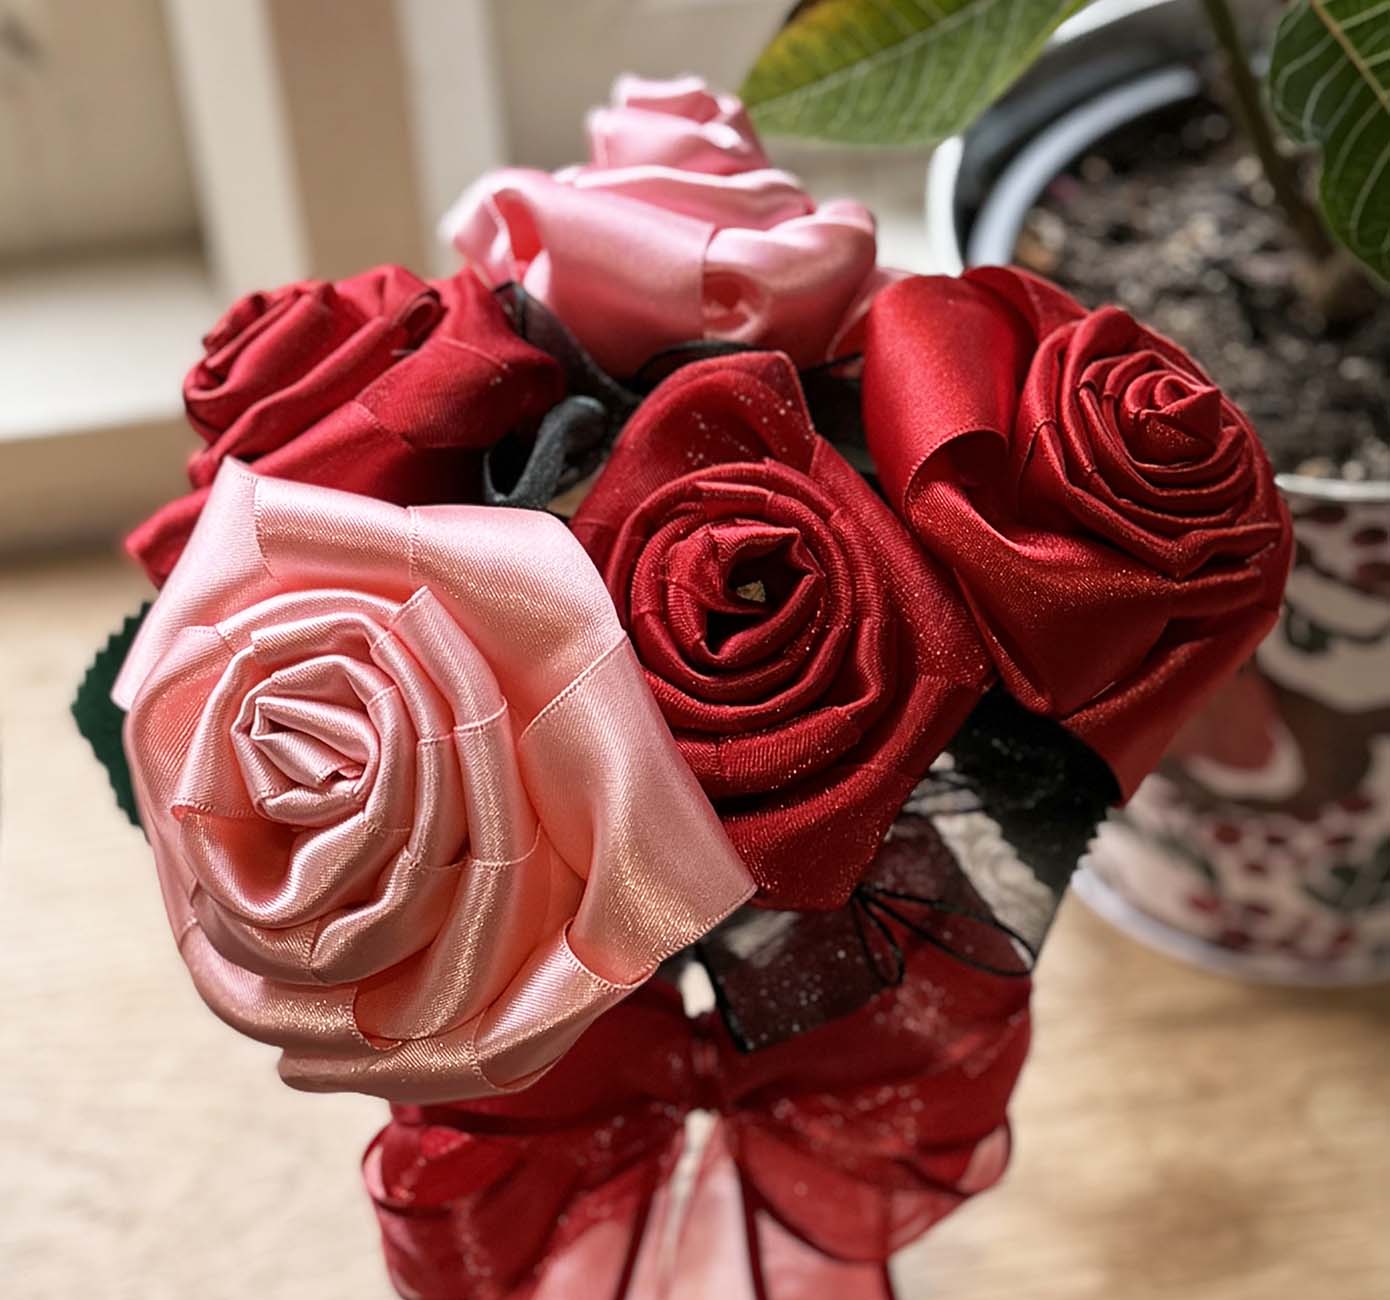 Roses made from ribbons